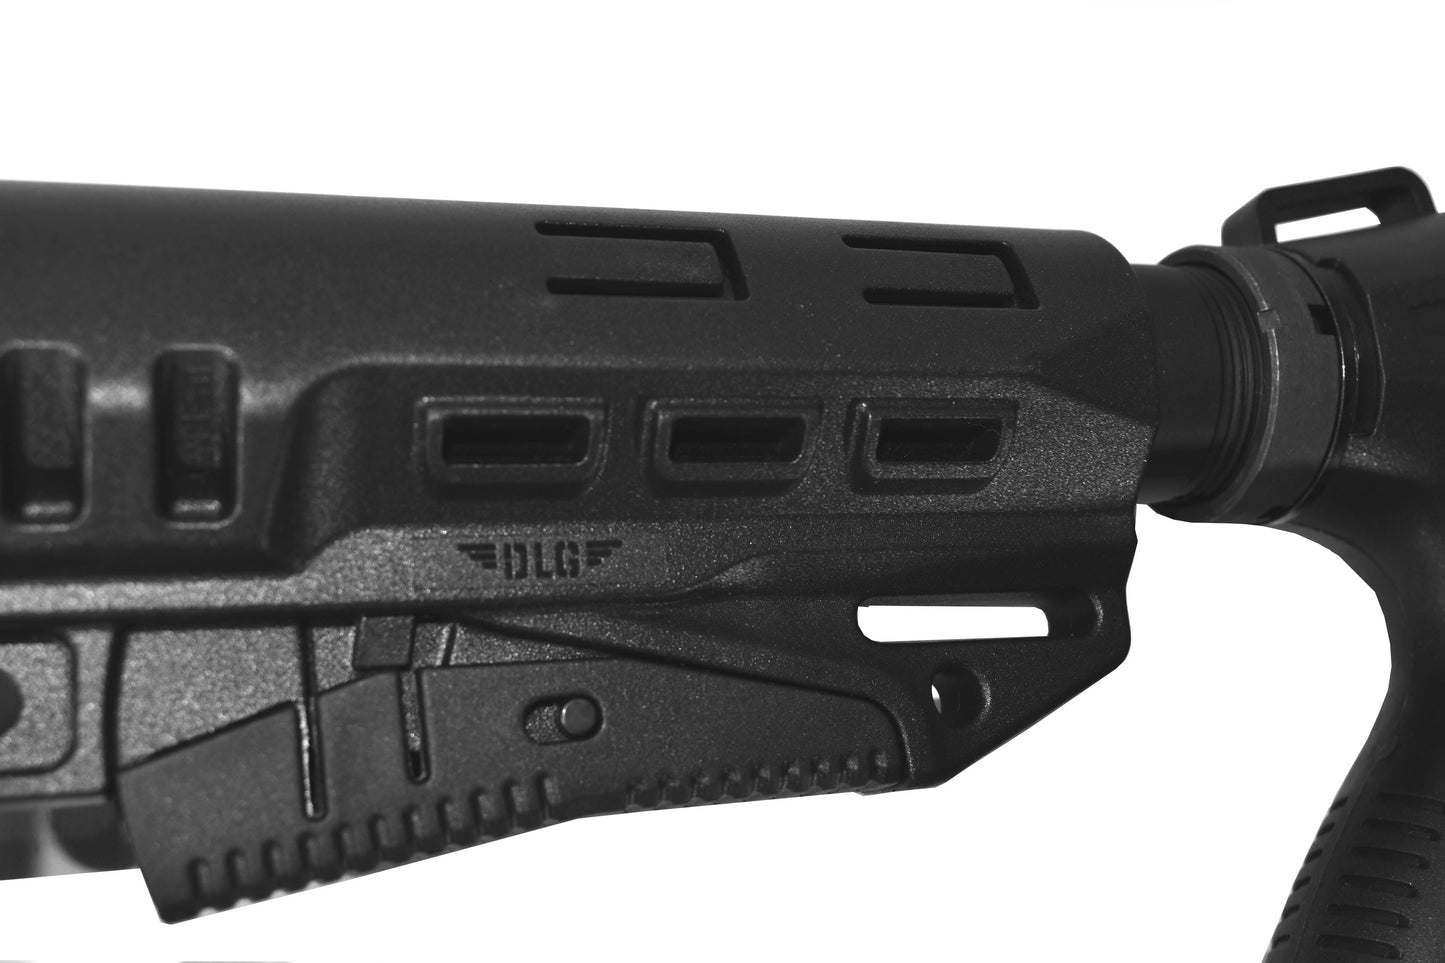 Tactical Insane Stock Compatible With Mossberg 500 12 Gauge Pump.